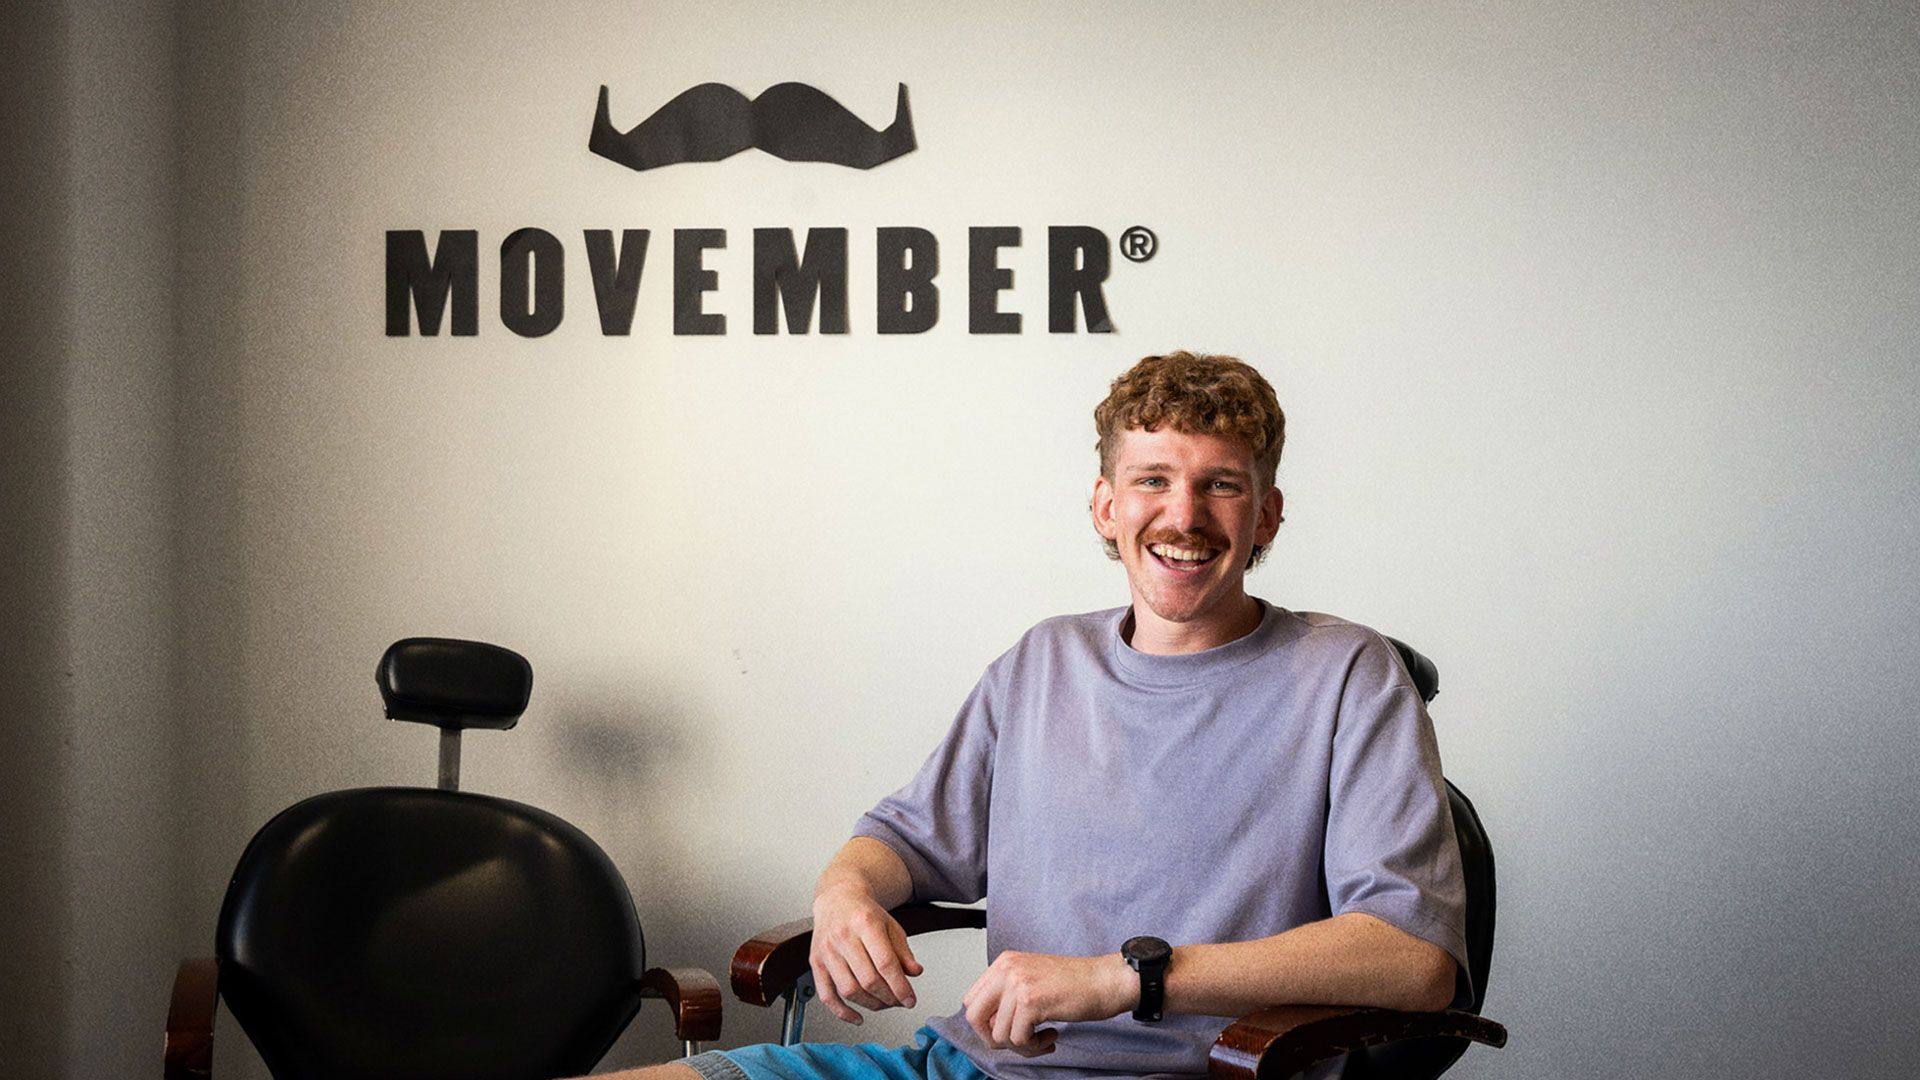 Young man sits in barber chair with Movember sign on background behind him. He smiles looking at the camera wearing a light purple t-shirt.